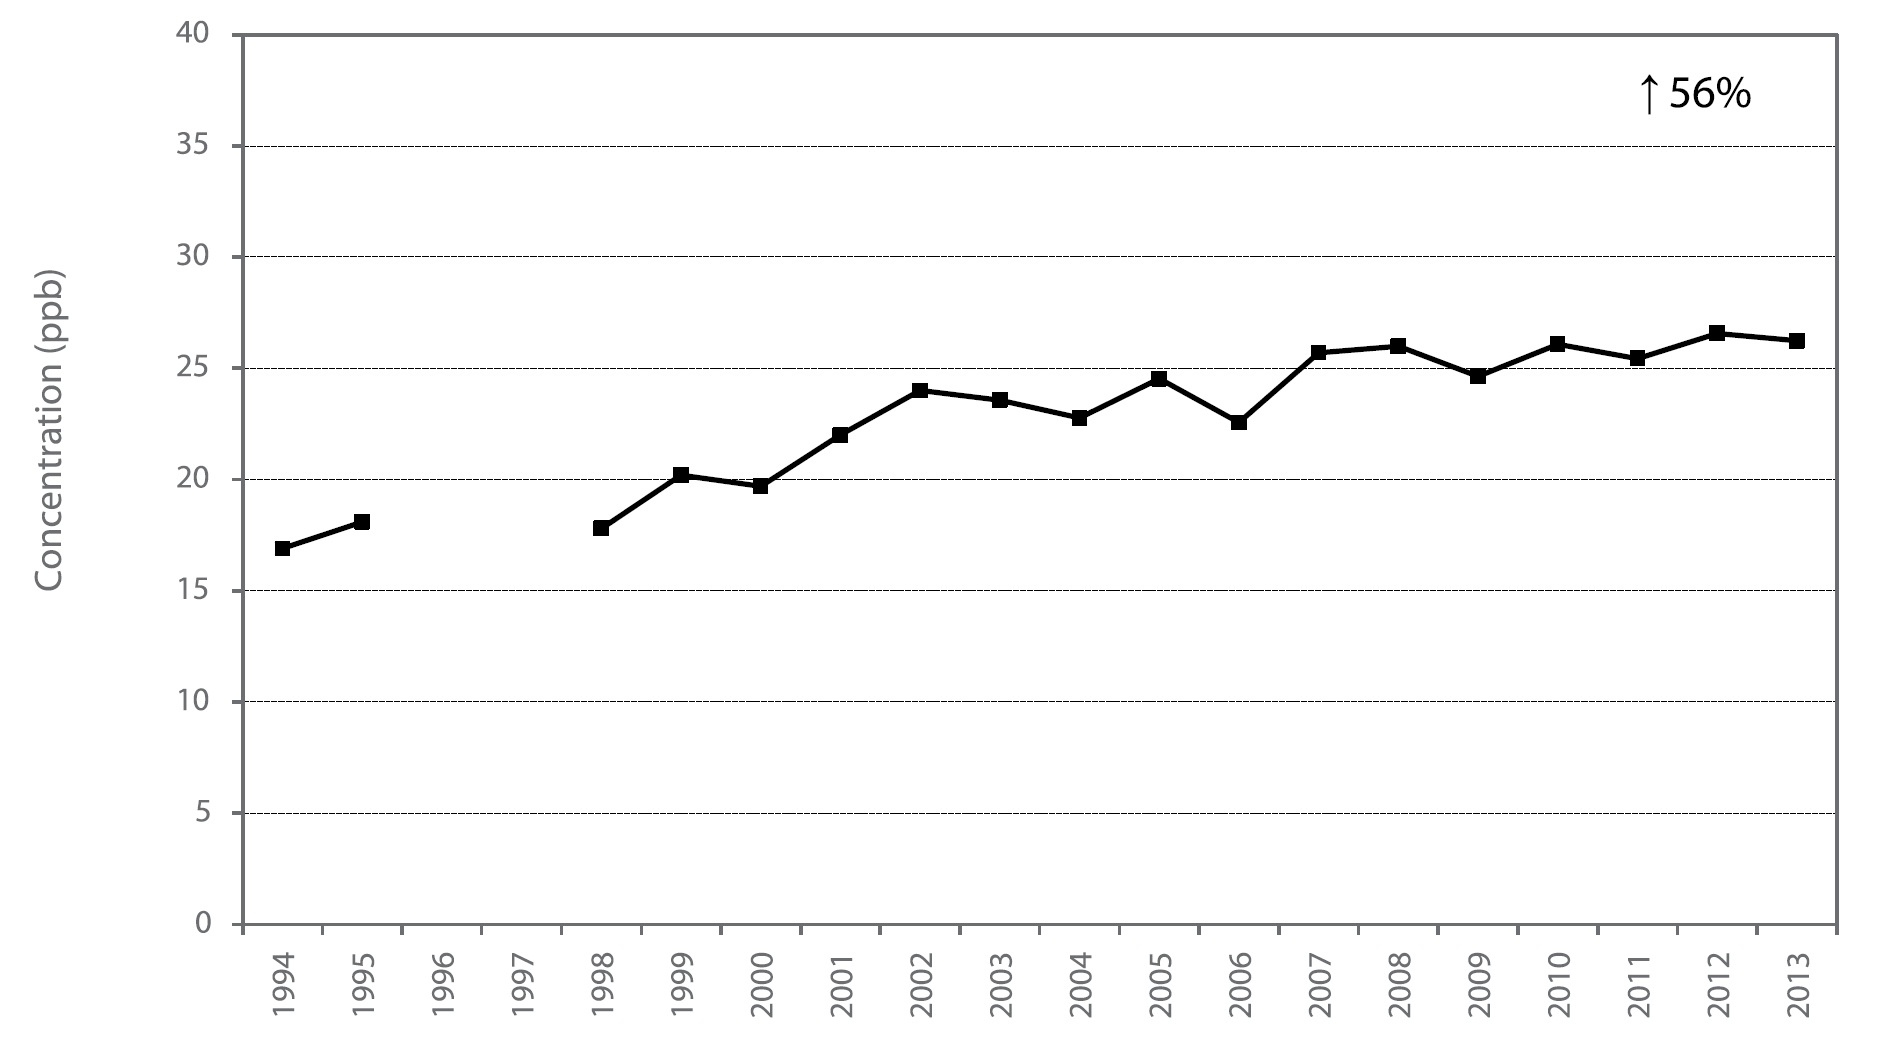 Figure A13 is a line chart displaying the ozone annual mean at Toronto Downtown from 1994 to 2013. Over this 20-year period, ozone increased 56%.